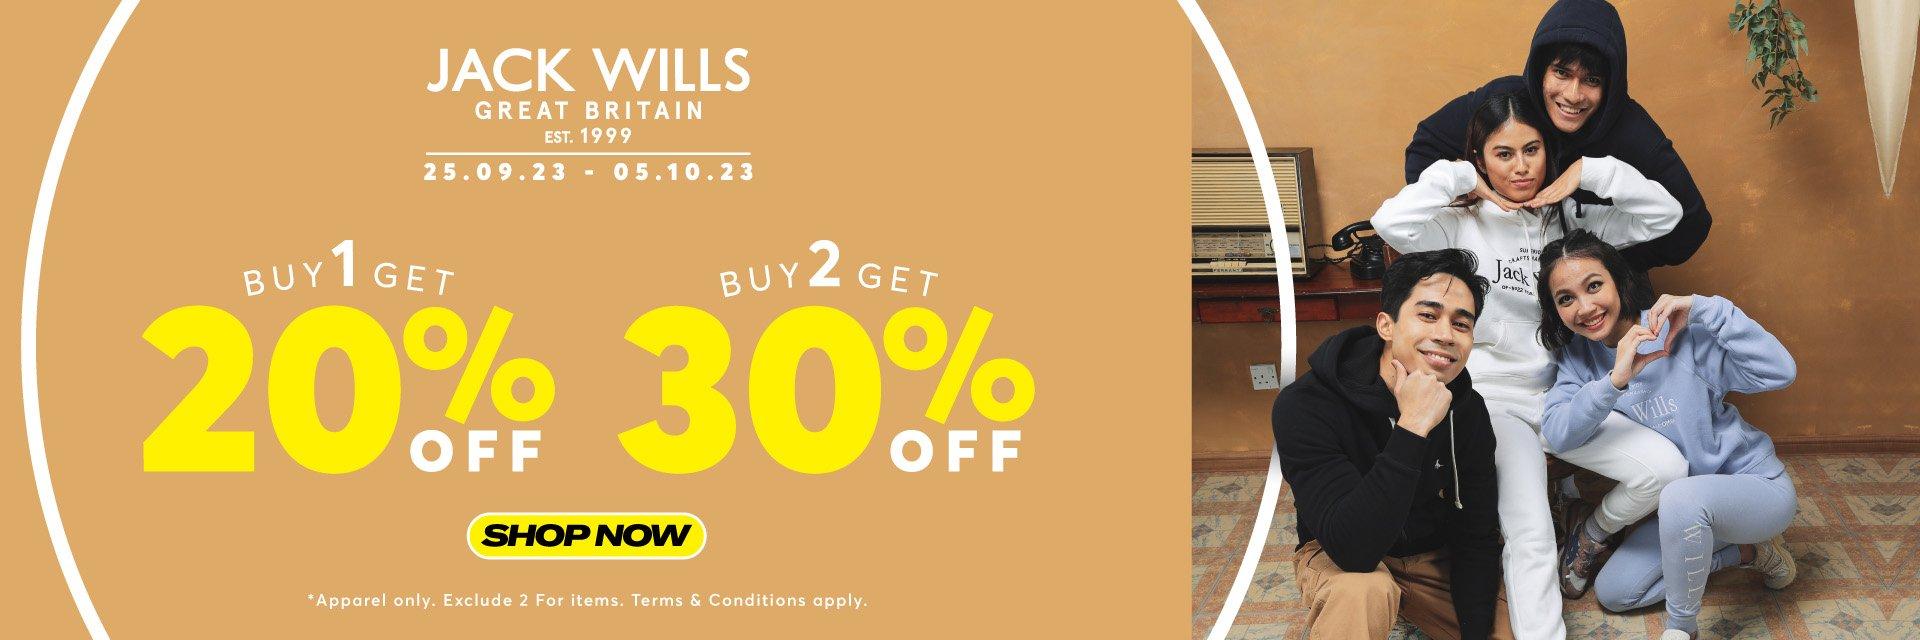 Jack Wills 2 for 30% Off